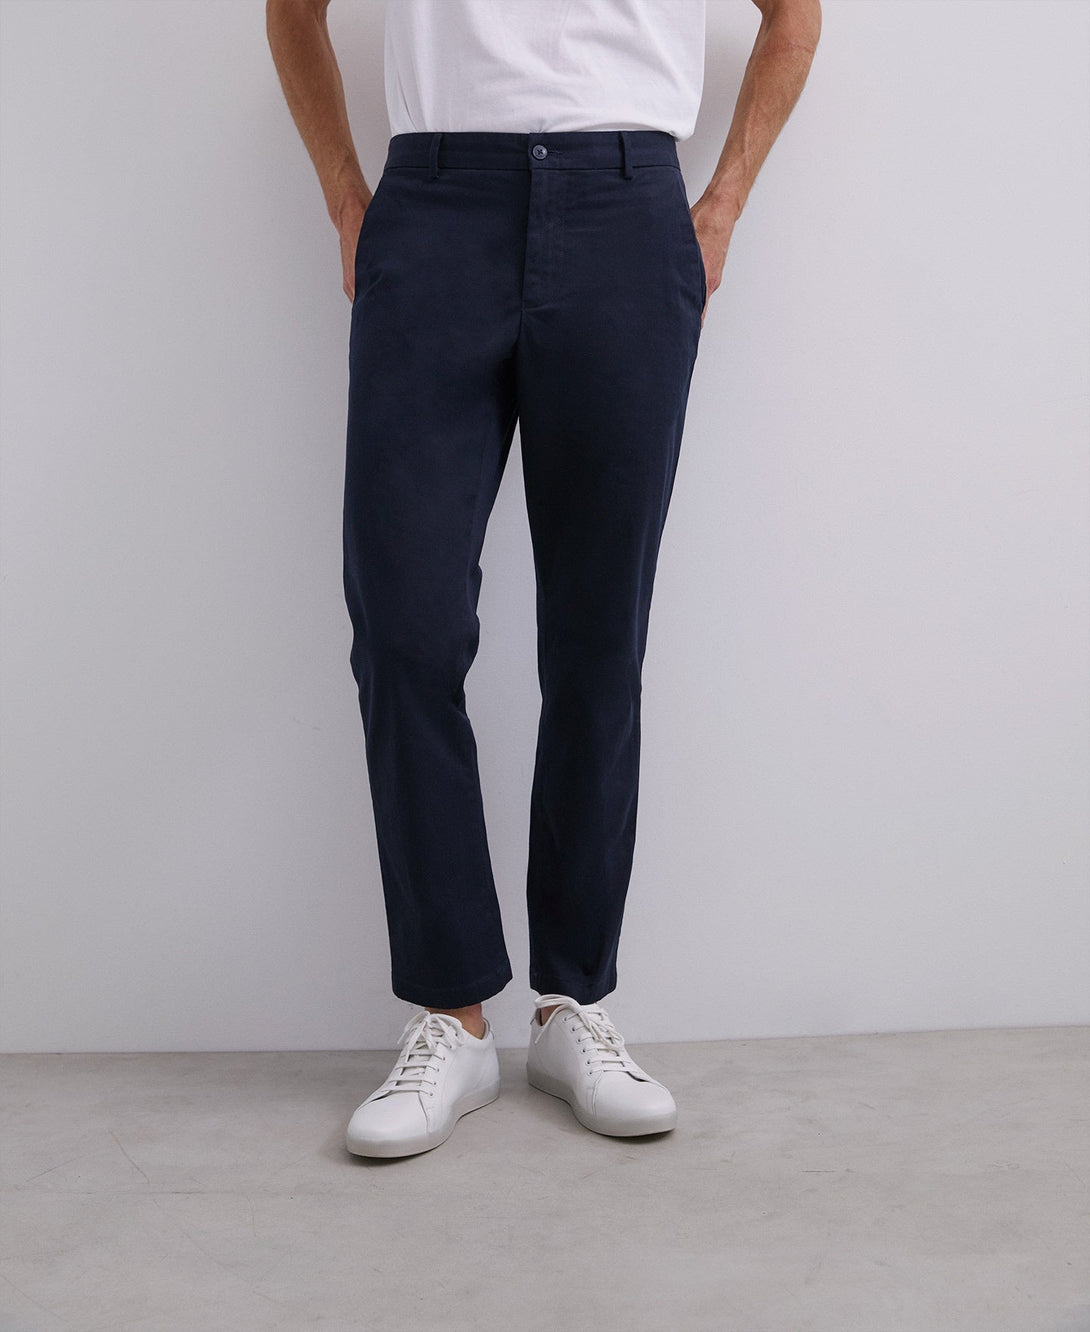 Men Trousers | Navy Blue Organic Cotton Chino Trousers by Spanish designer Adolfo Dominguez